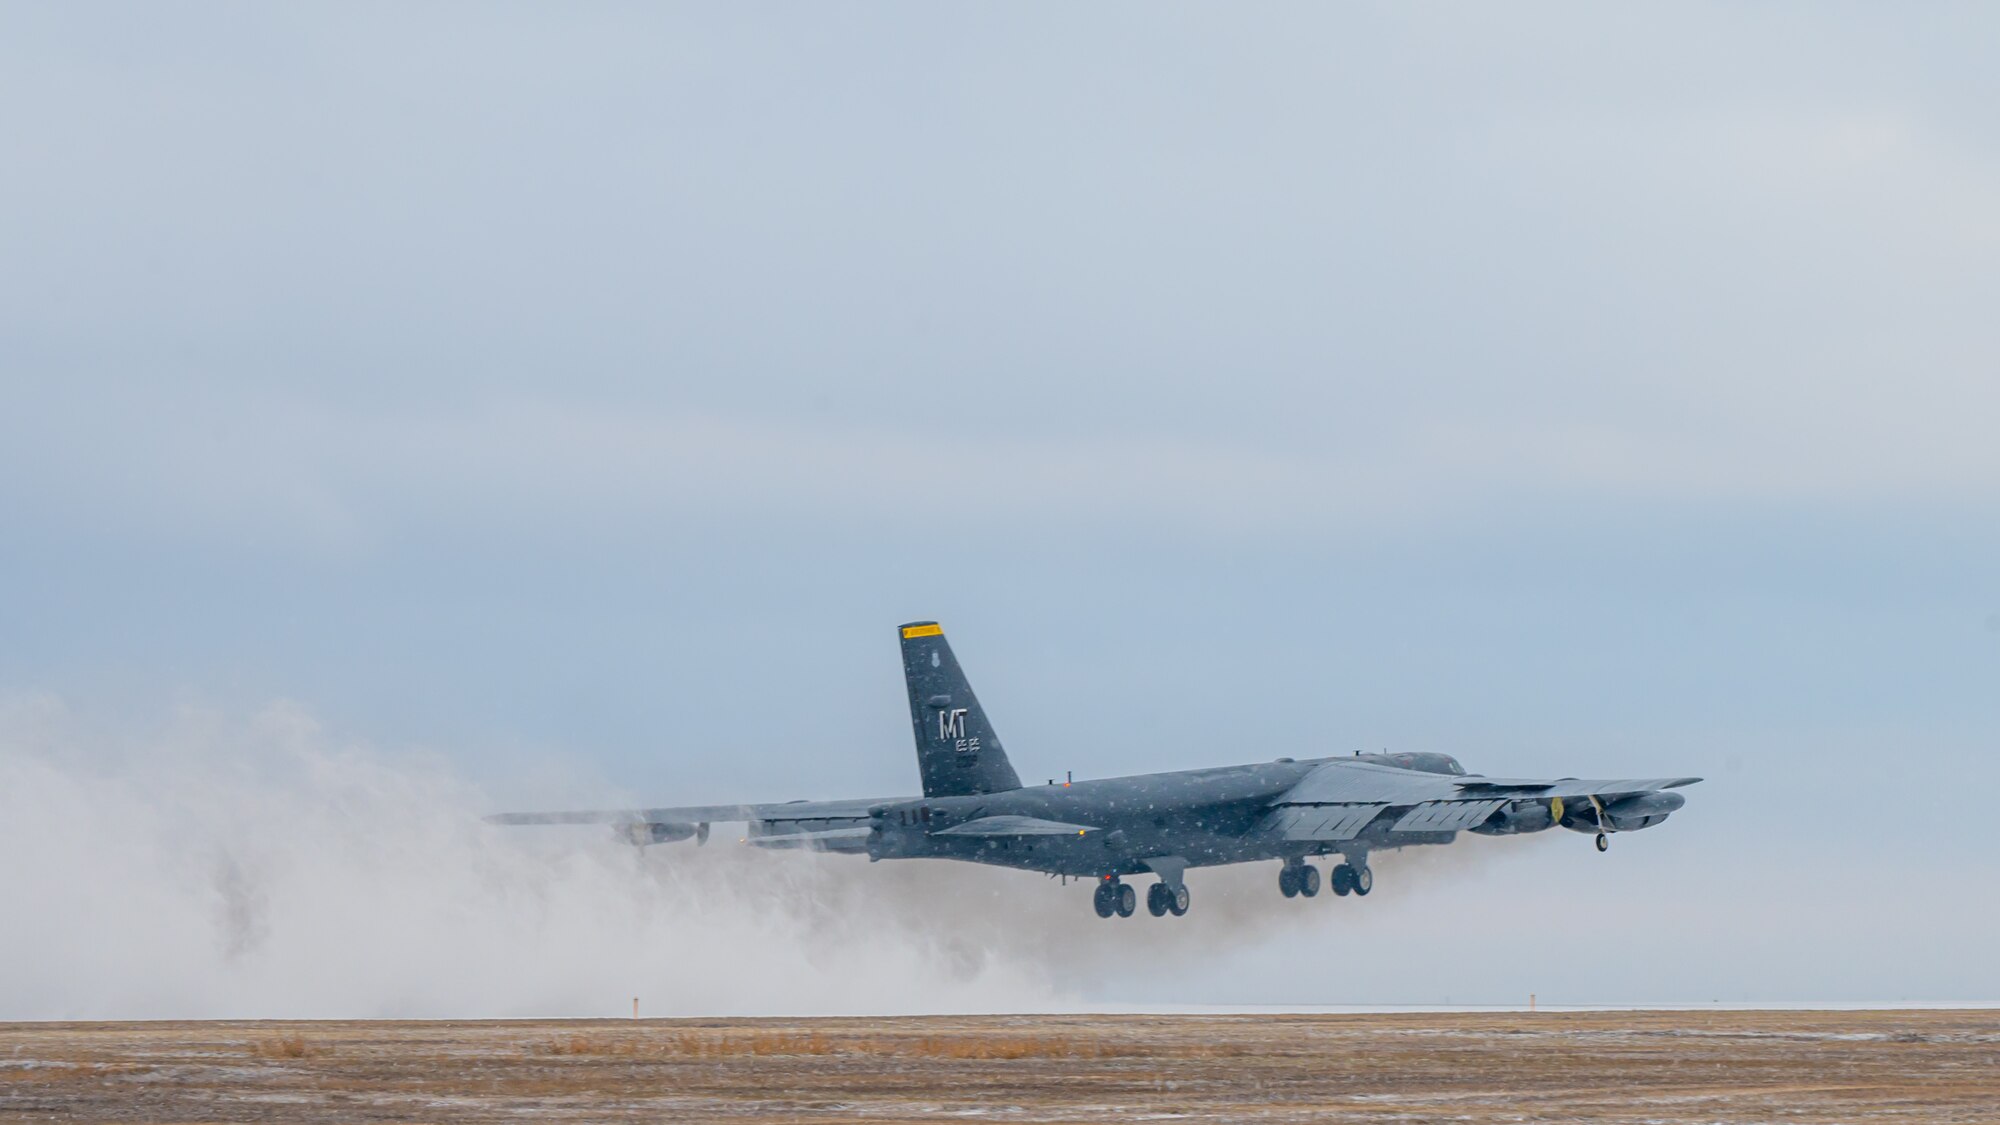 A B-52H Stratofortress takes off from Minot Air Force Base, North Dakota, Nov. 27, 2023. Only the 'H' model remains in Air Force inventory and is assigned to the 5th Bomb Wing at Minot AFB, North Dakota, and the 2nd Bomb Wing at Barksdale AFB, Louisiana, which fall under Air Force Global Strike Command. (U.S. Air Force photo by Airman 1st Class Alexander Nottingham)